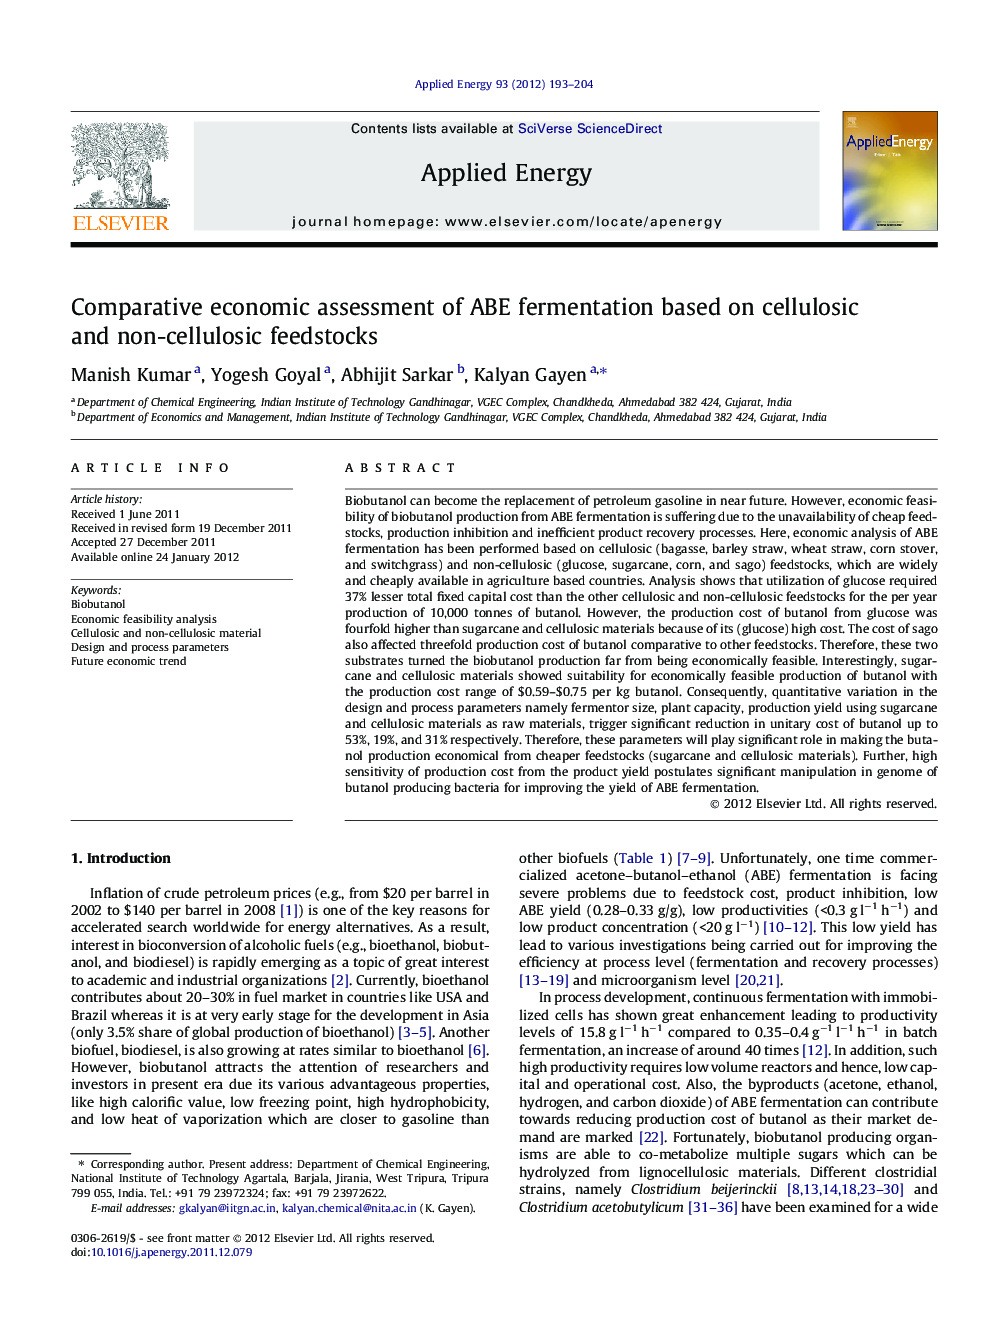 Comparative economic assessment of ABE fermentation based on cellulosic and non-cellulosic feedstocks